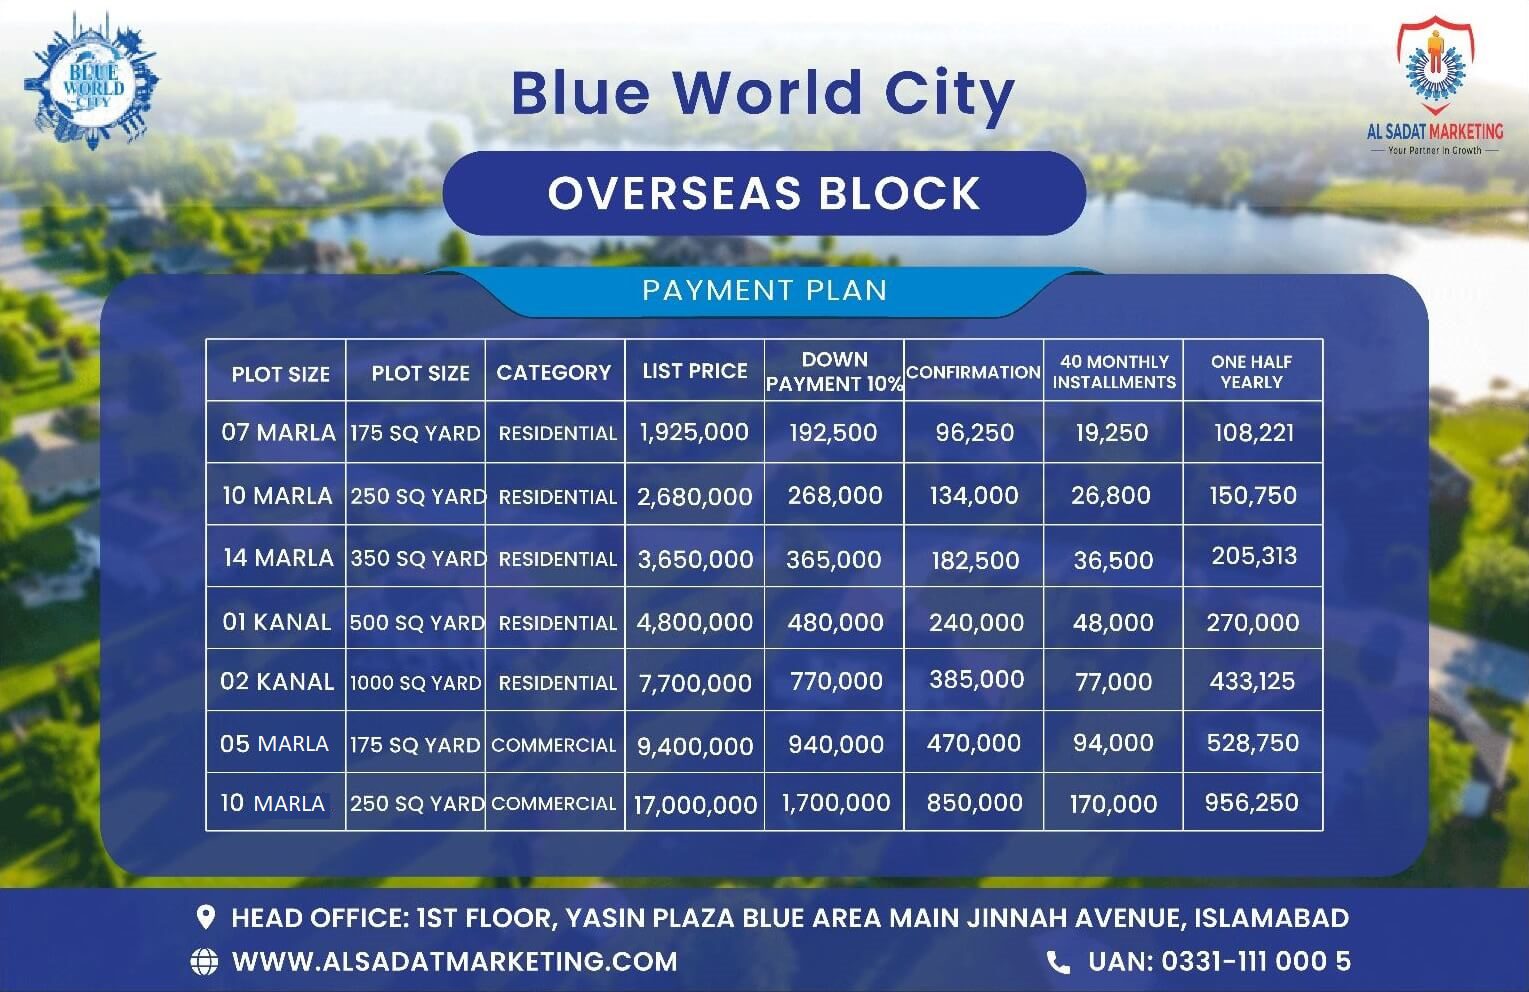 blue world city overseas block residential and commercial plots combined payment plan – blue world city islamabad overseas block residential and commercial plots combined payment plan – blue world city rawalpindi overseas block residential and commercial plots combined payment plan – blue world city overseas block payment plan – blue world city islamabad overseas block payment plan – blue world city rawalpindi overseas block payment plan – blue world city payment plan – blue world city islamabad payment plan - blue world city rawalpindi payment plan – blue world city– blue world city islamabad – blue world city rawalpindi– blue world city housing society – blue world city islamabad housing society – blue world city real estate project – blue world city islamabad real estate project - al sadat marketing - alsadat marketing - al-sadat marketing